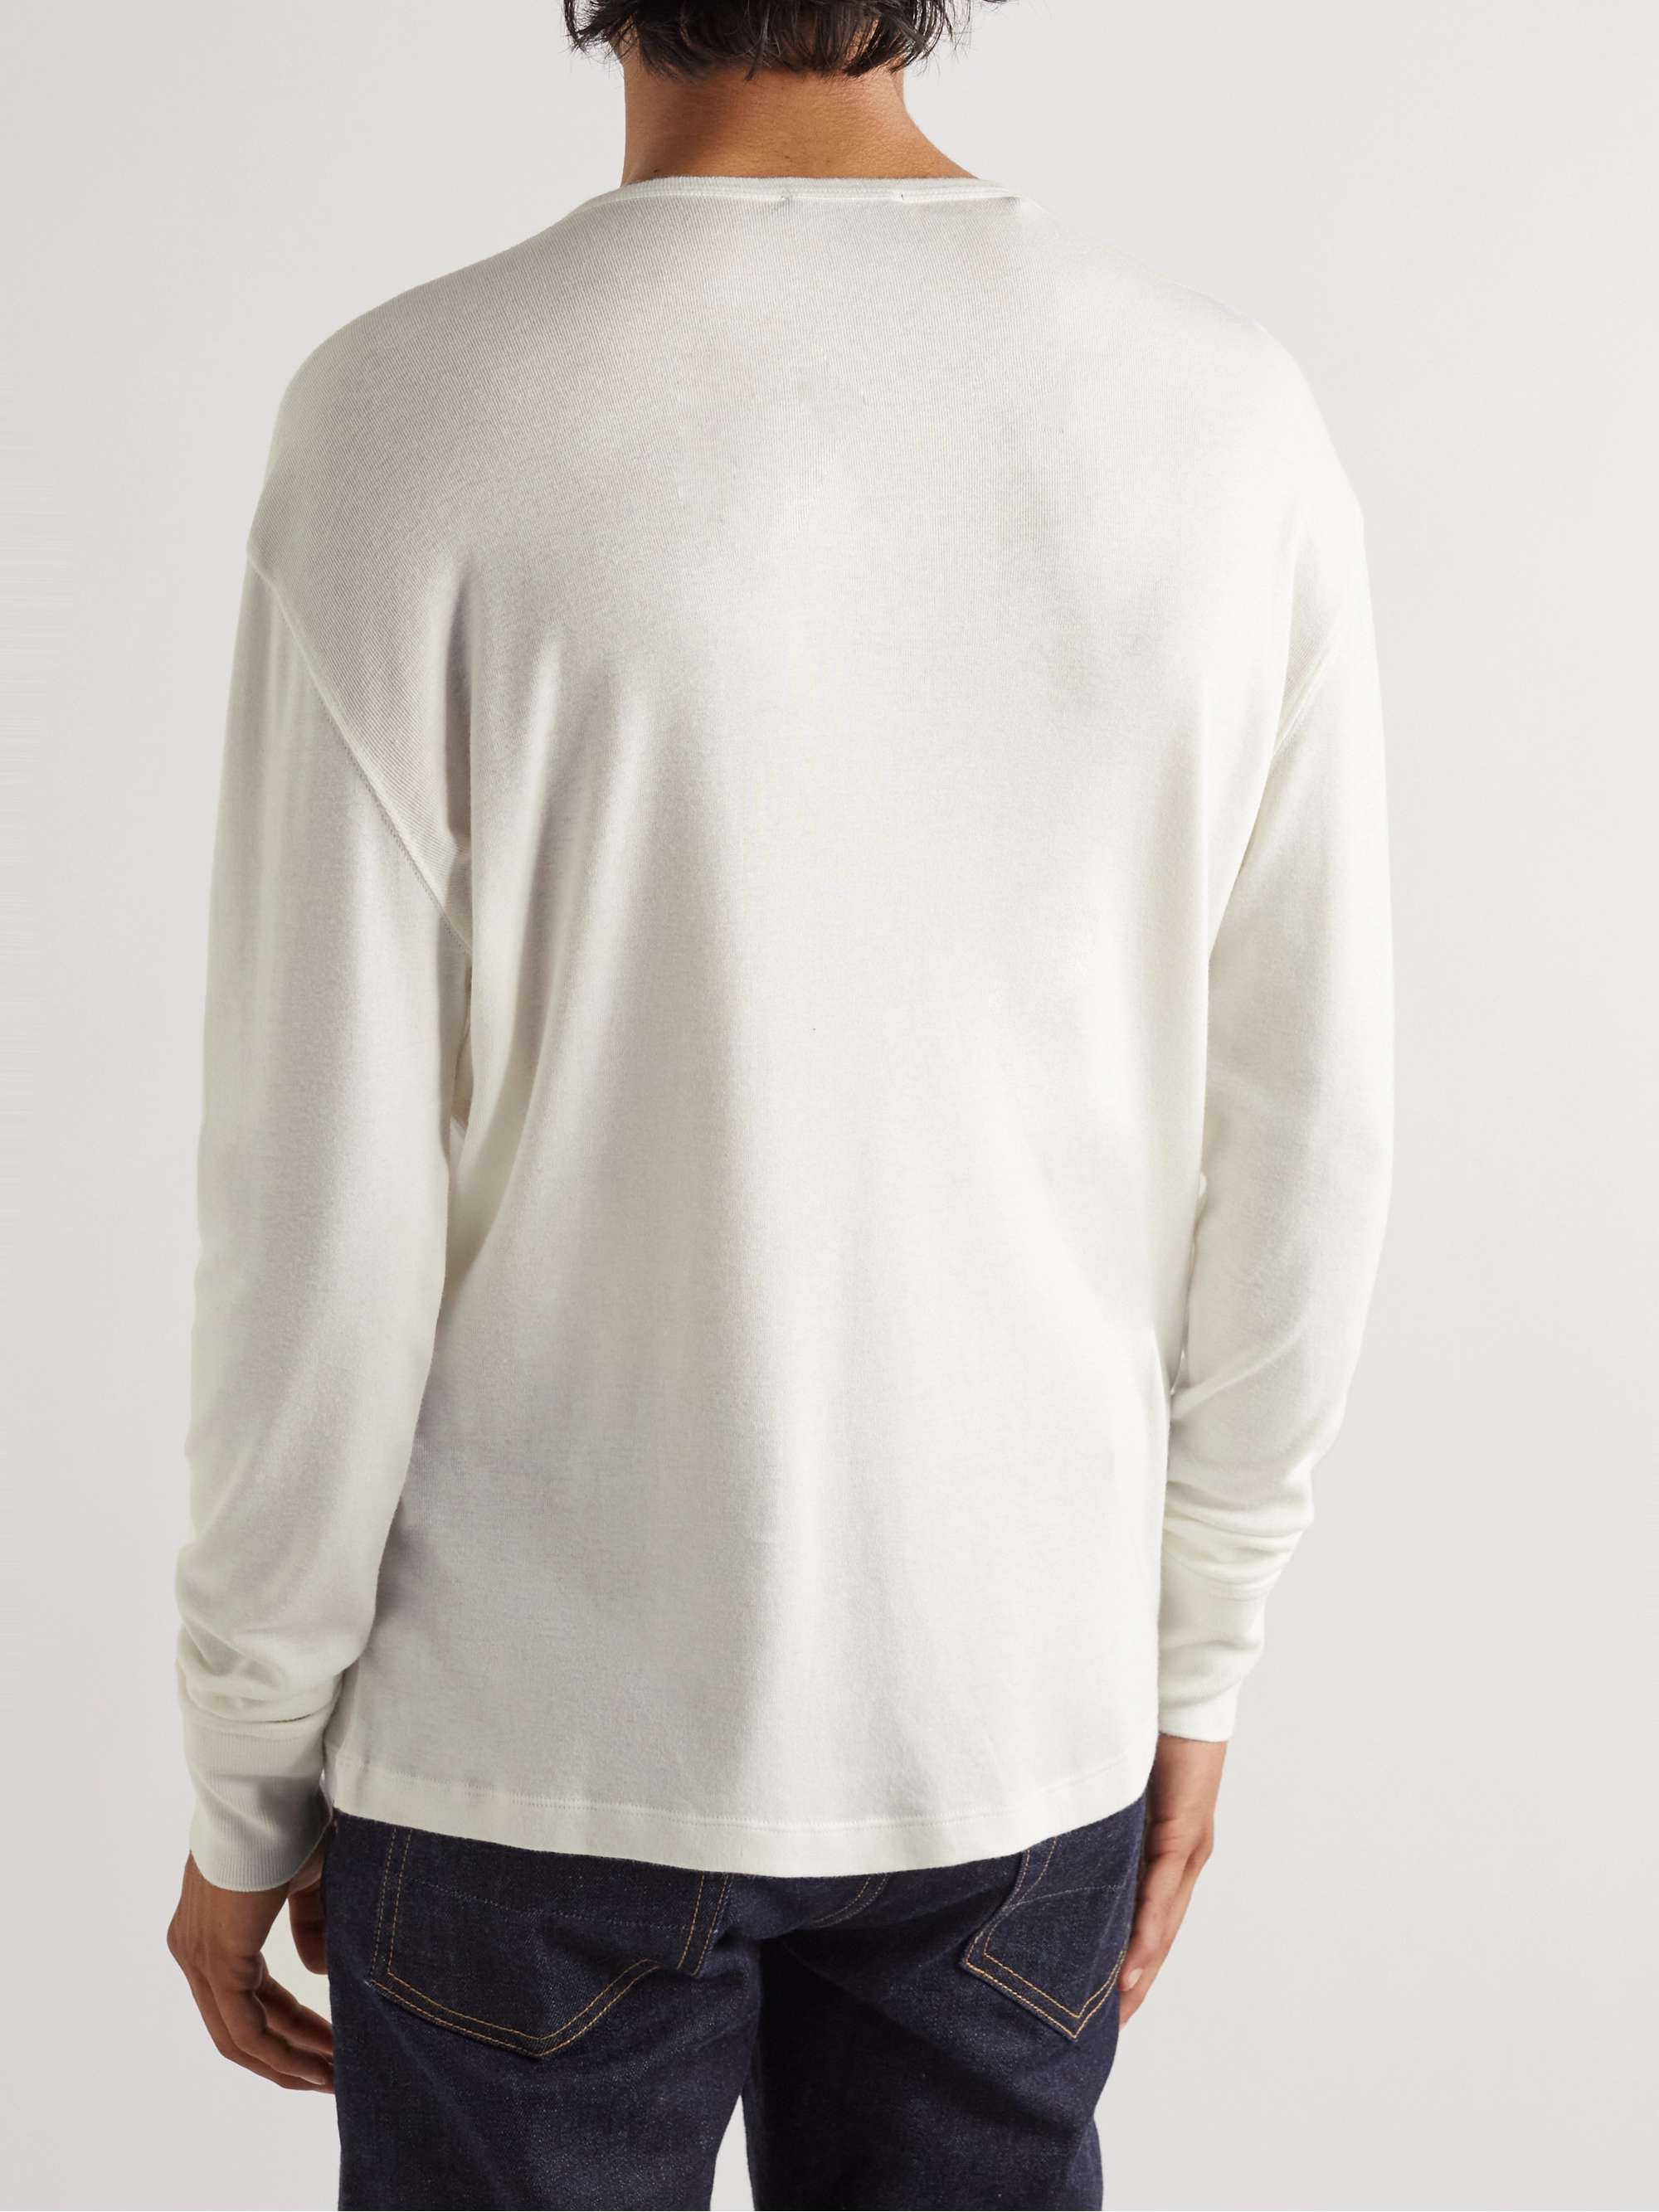 TOM FORD Cotton-Jersey Henley T-Shirt